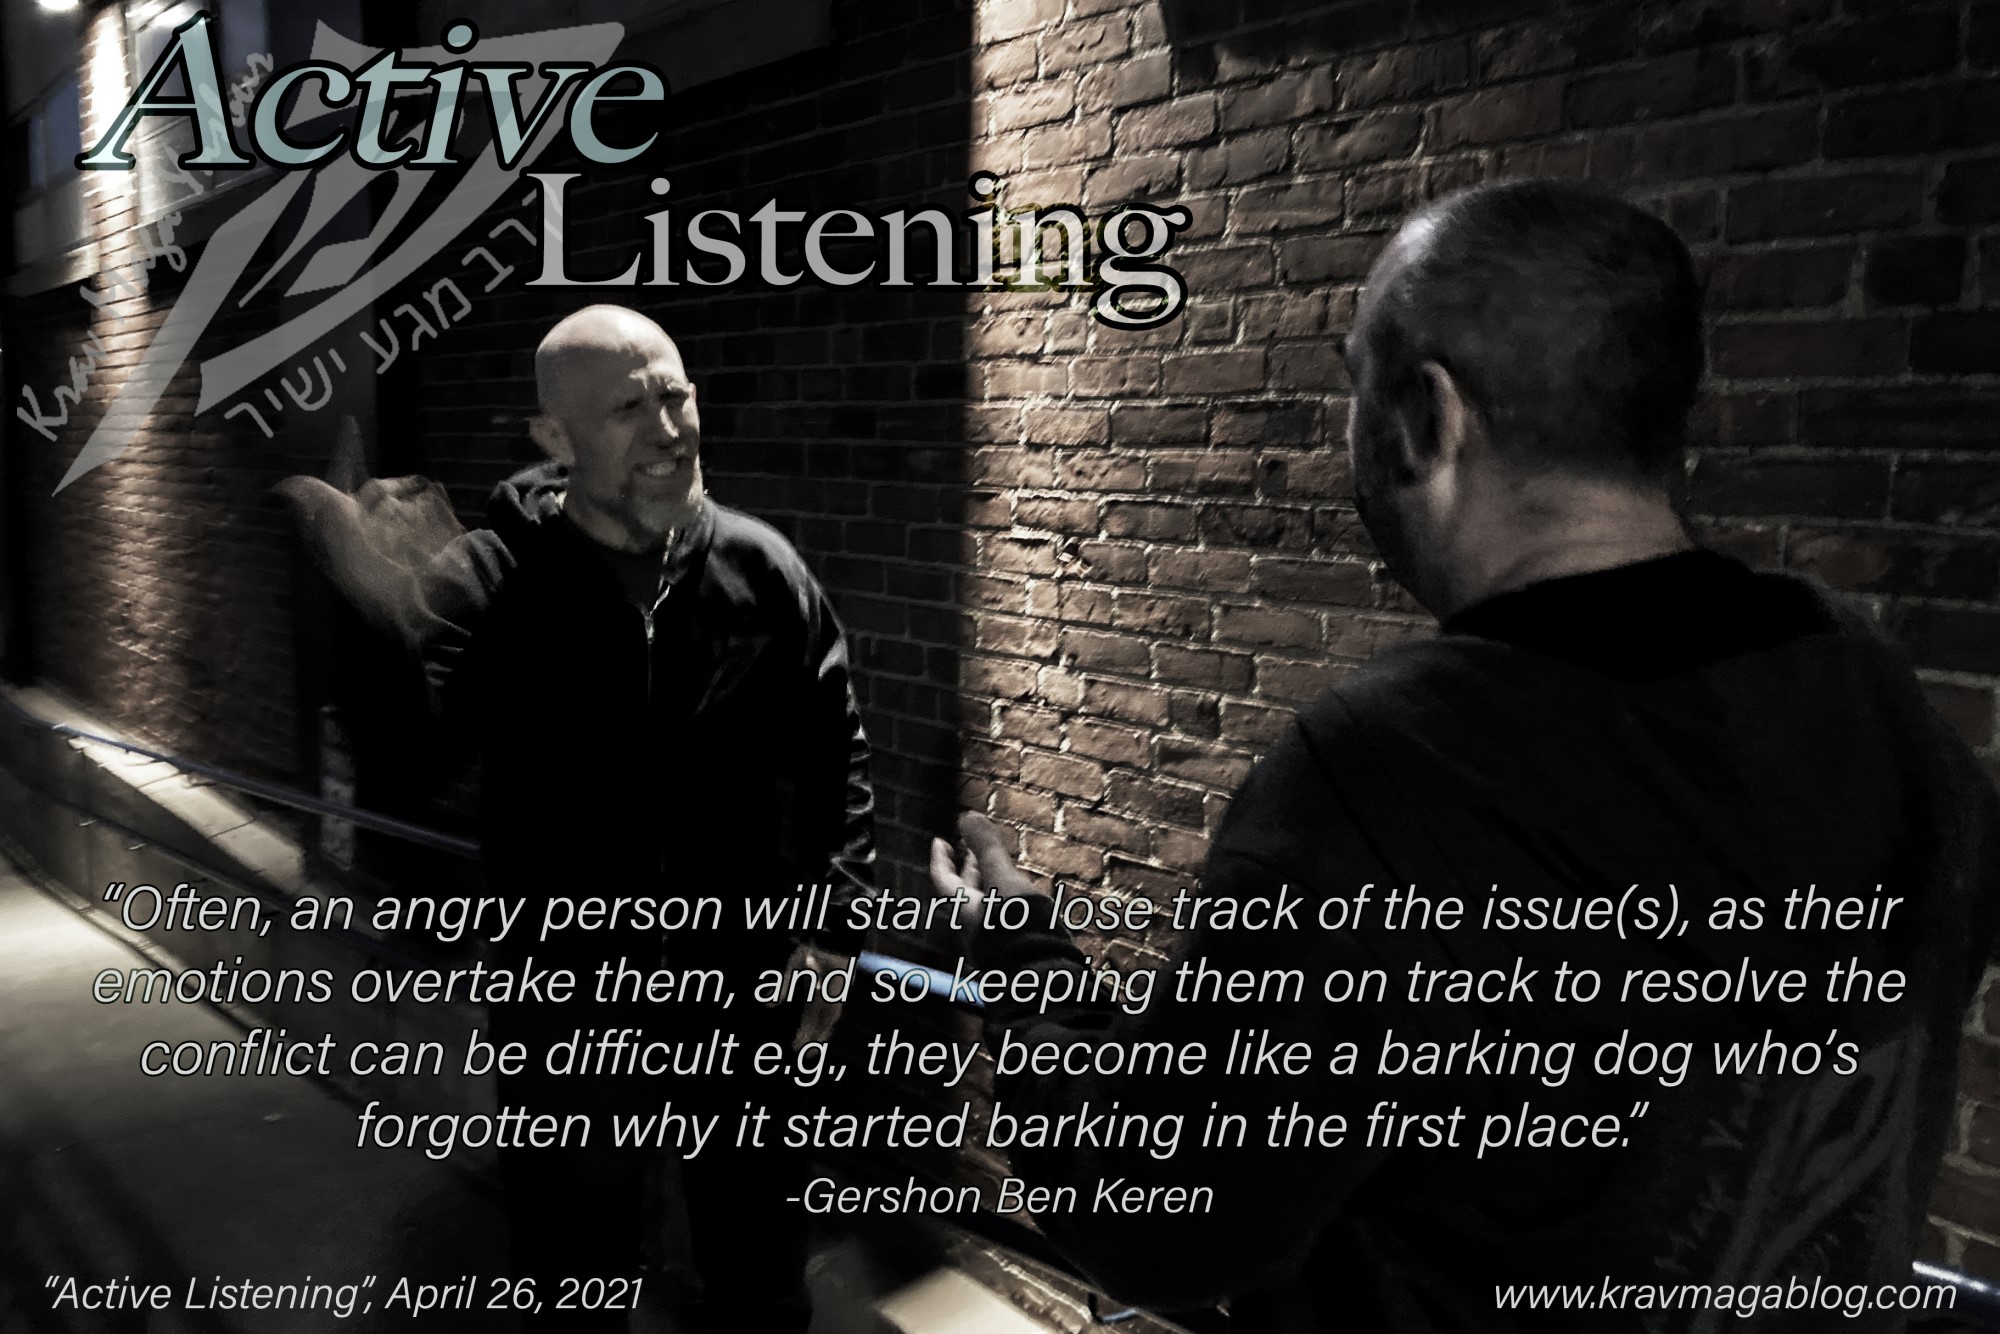 Blog About Active Listening